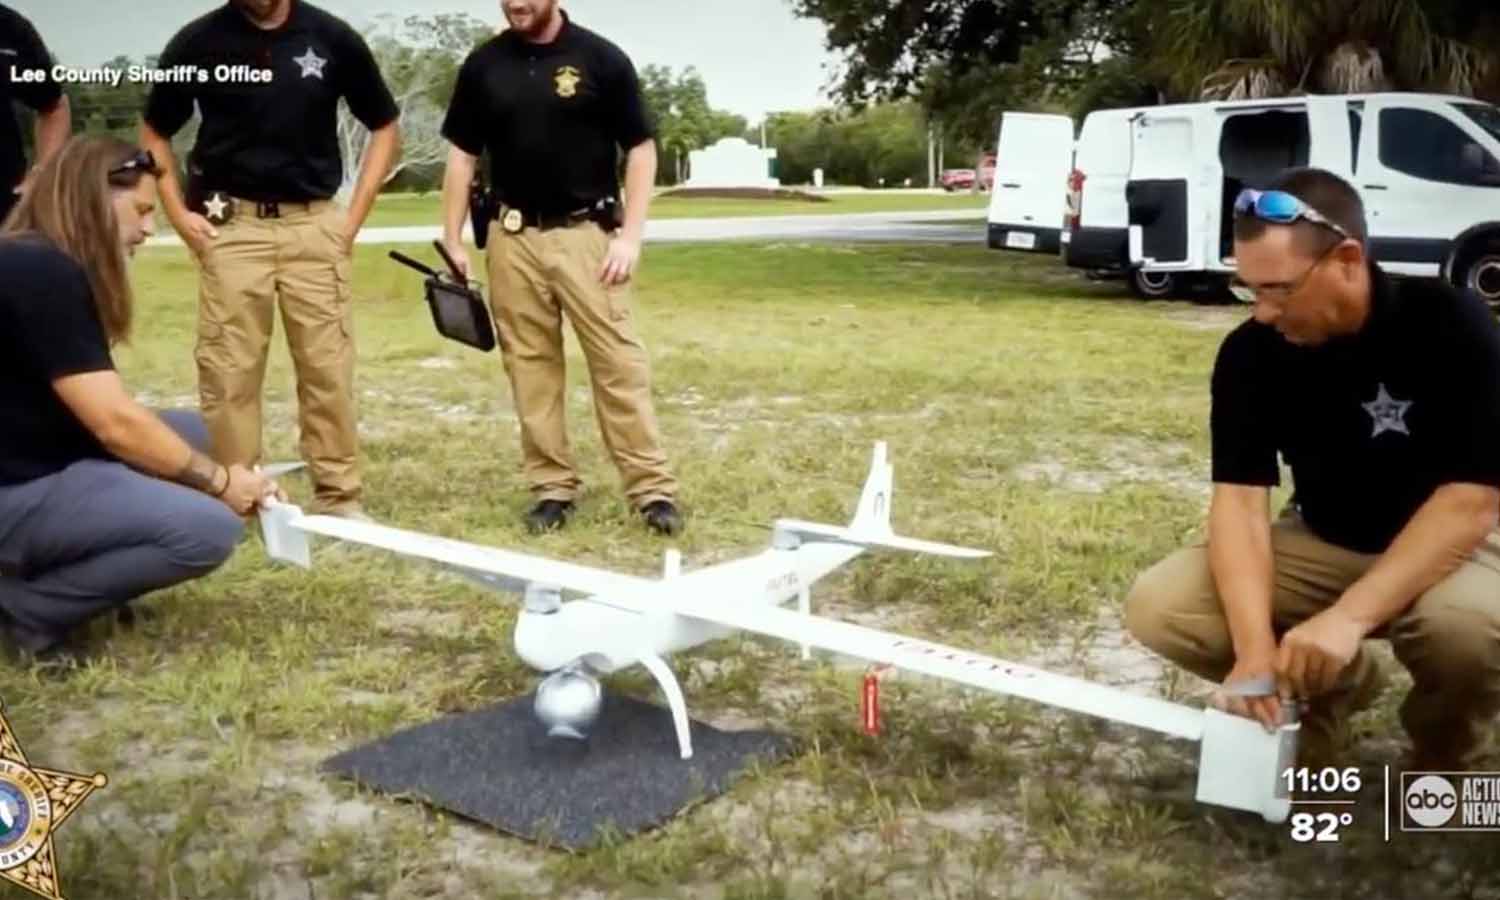 Dragonfish VTOL Drone Search Brian Laundrie in Lee County